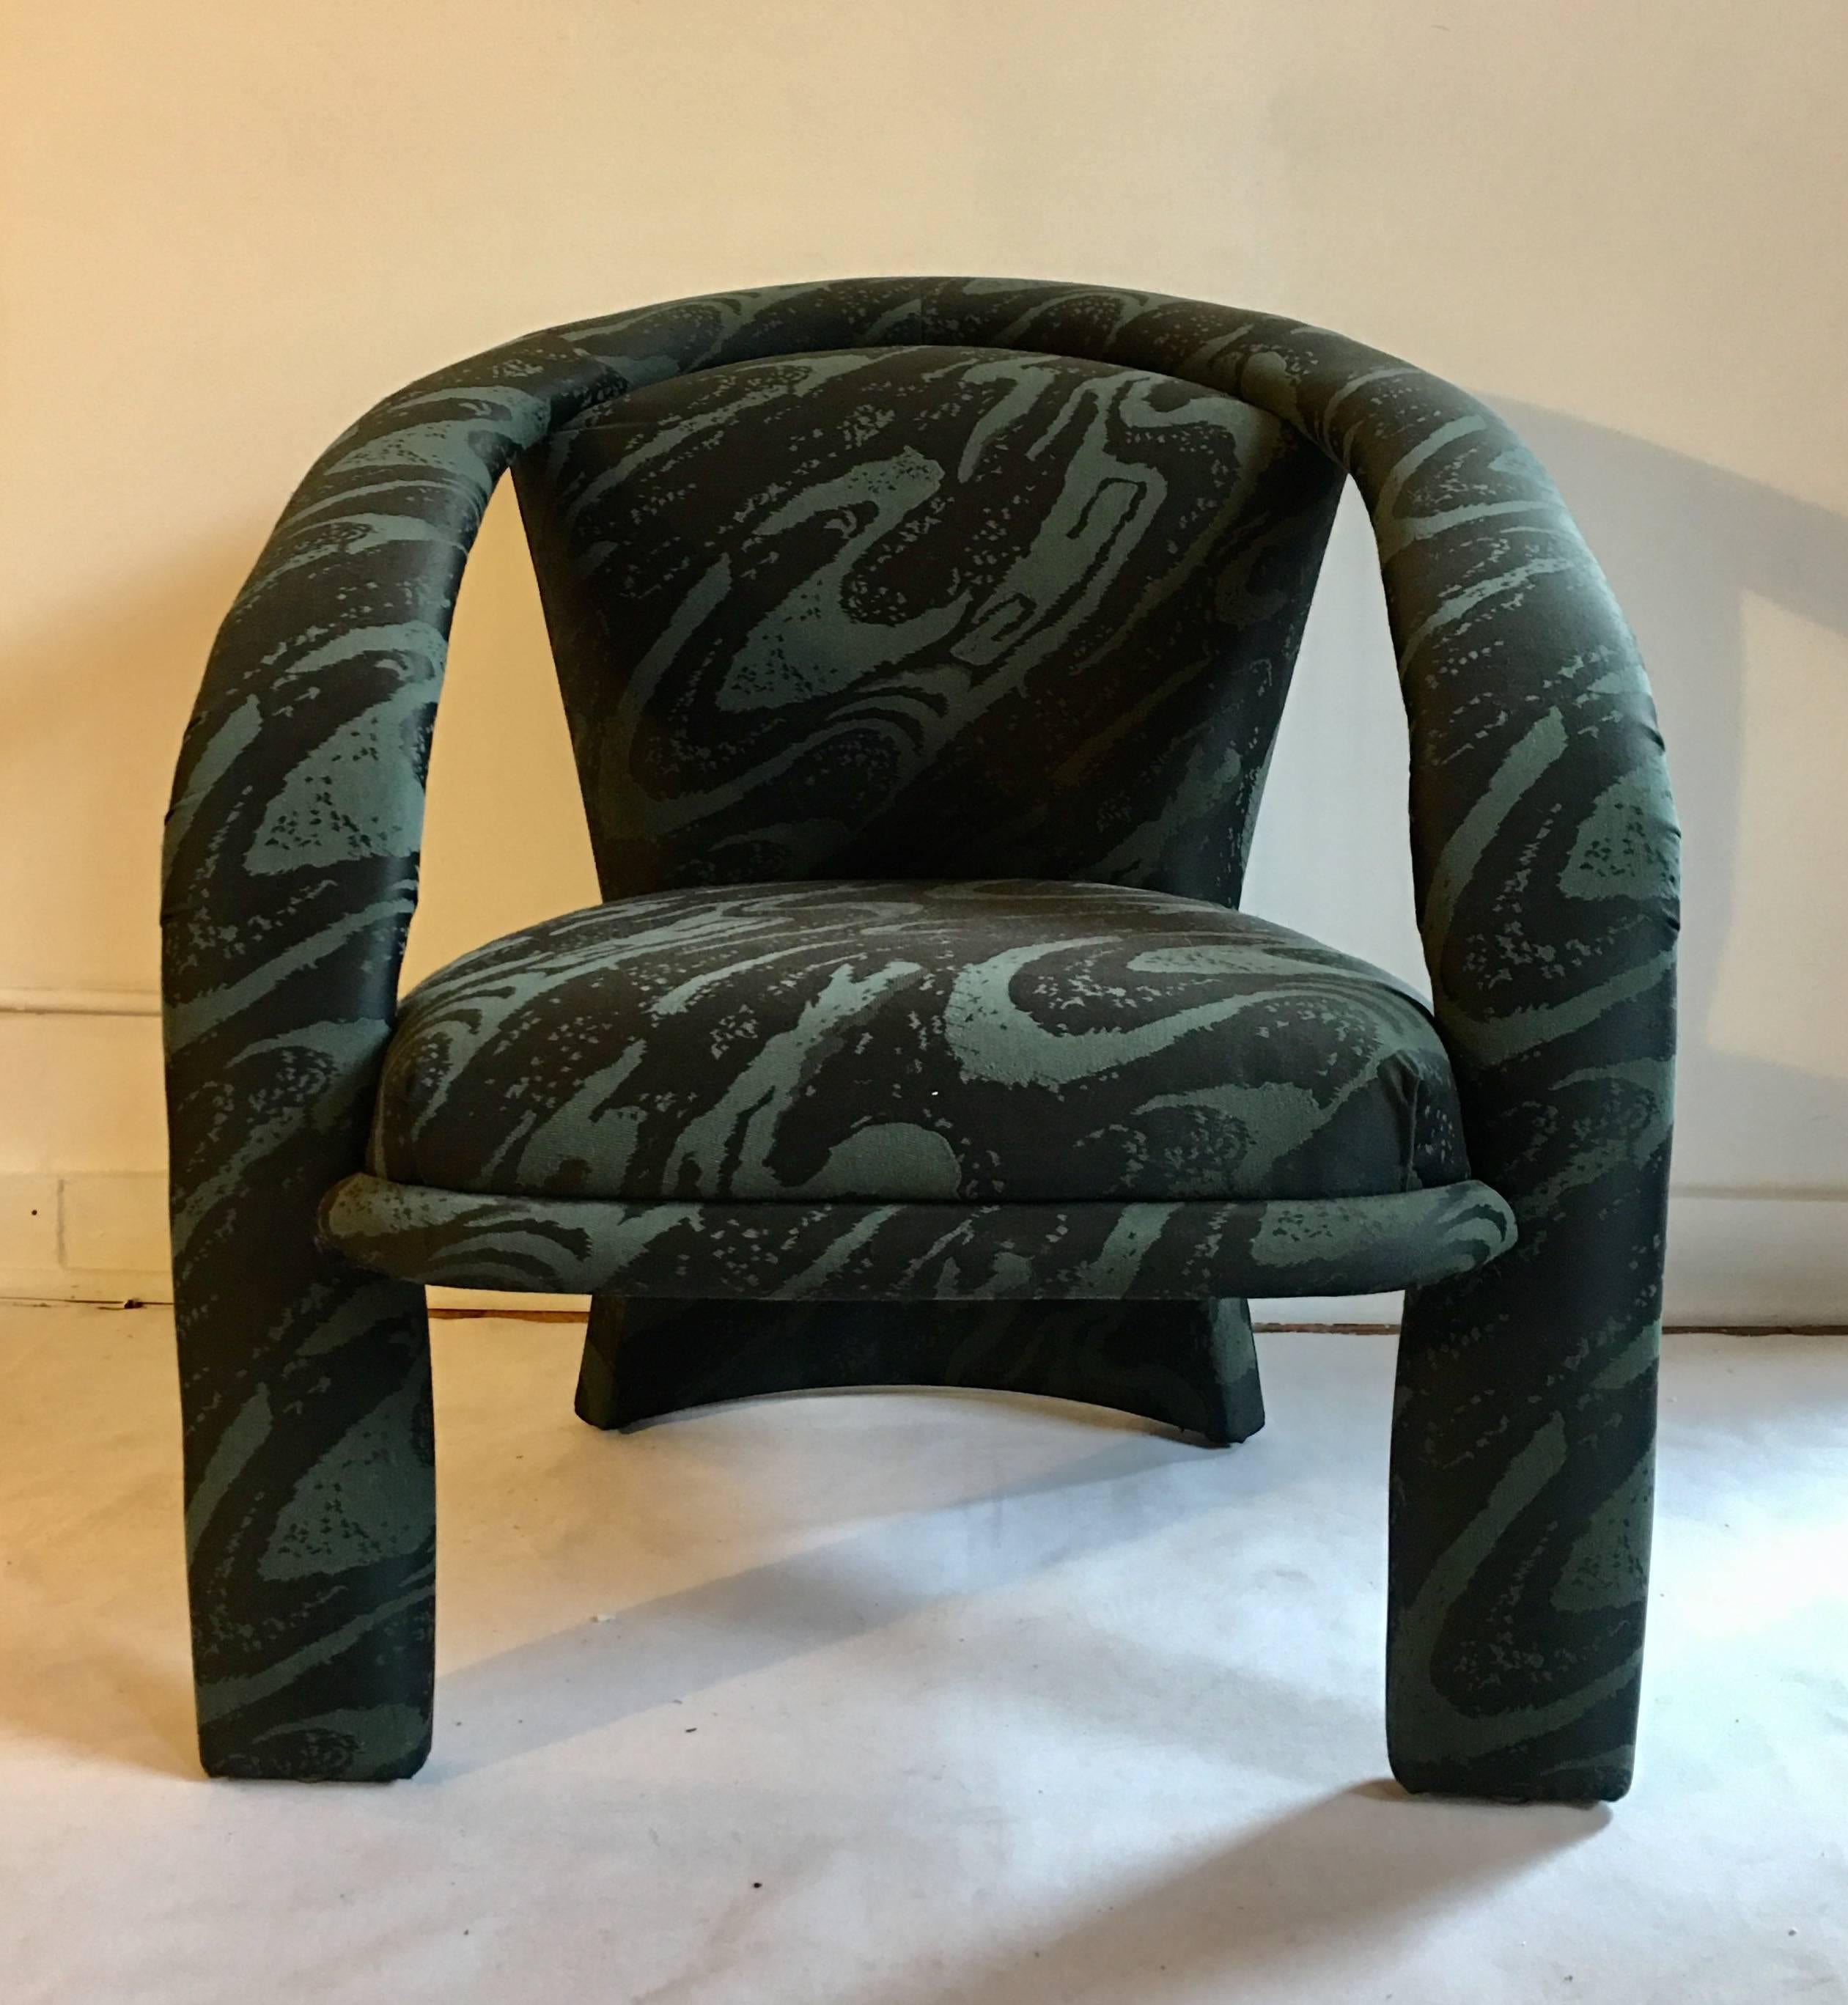 Modern Hollywood Regency style accent or lounge chair by Carsons. This unique sculptural design features a three leg curved frame upholstered in original malachite like green swirl upholstery. Original manufacturer label. In the style of Kelly